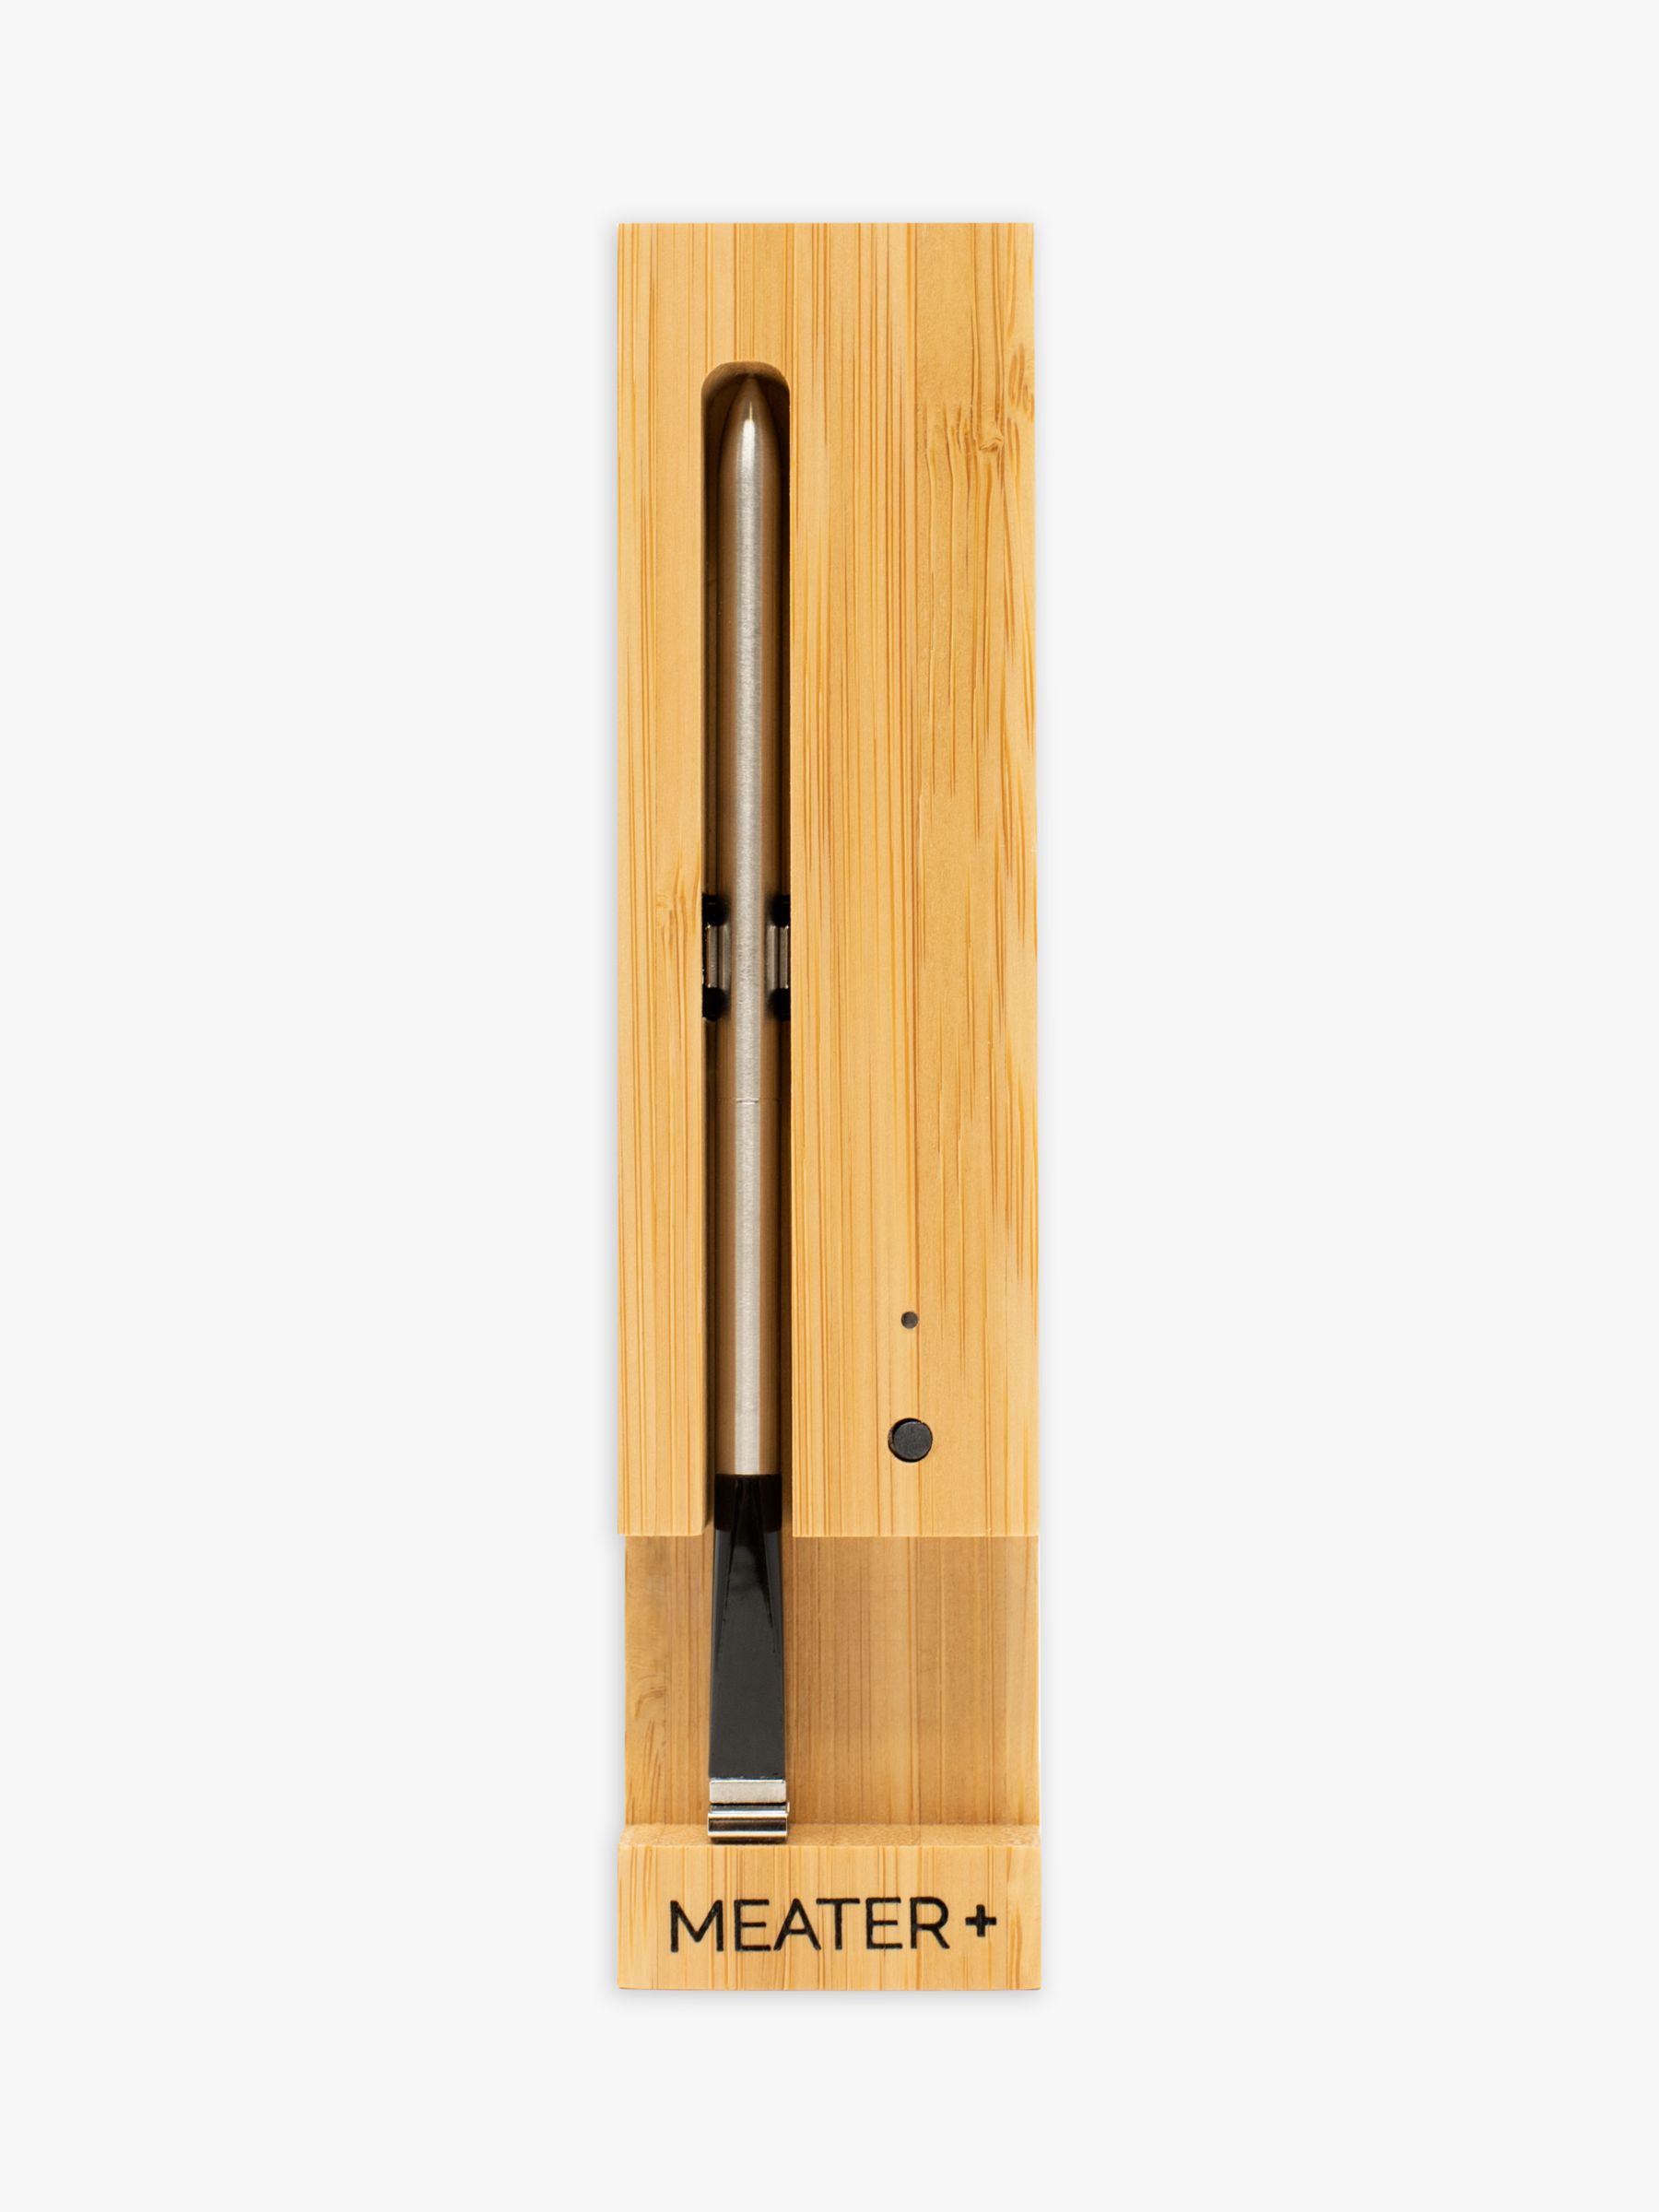 Meater+ meat thermometer